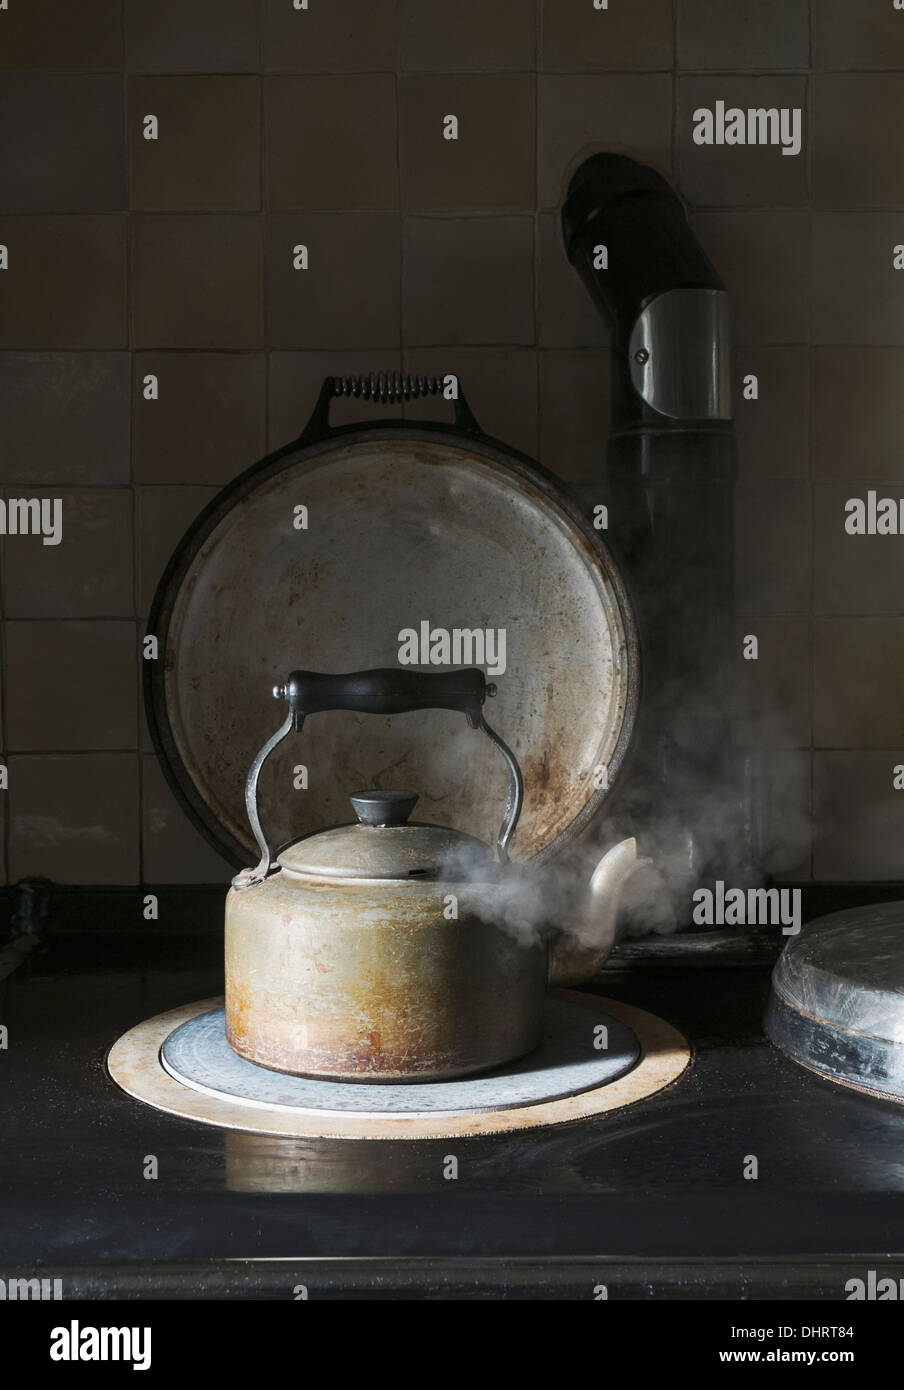 Kettle boiling on cooking range Stock Photo